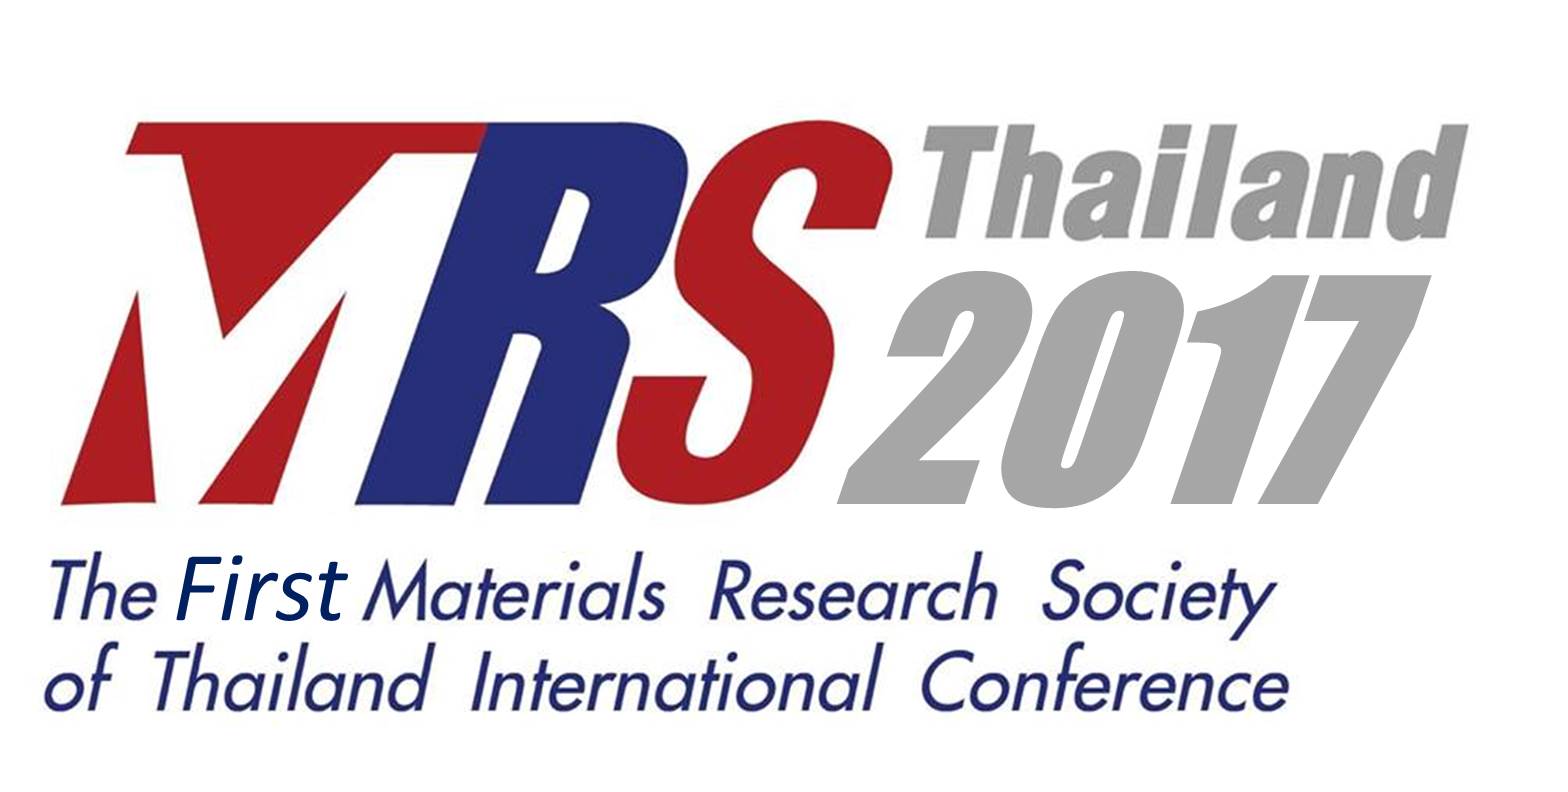 The First Materials Research Society of Thailand International Conference  (1st  MRS Thailand International Conference)